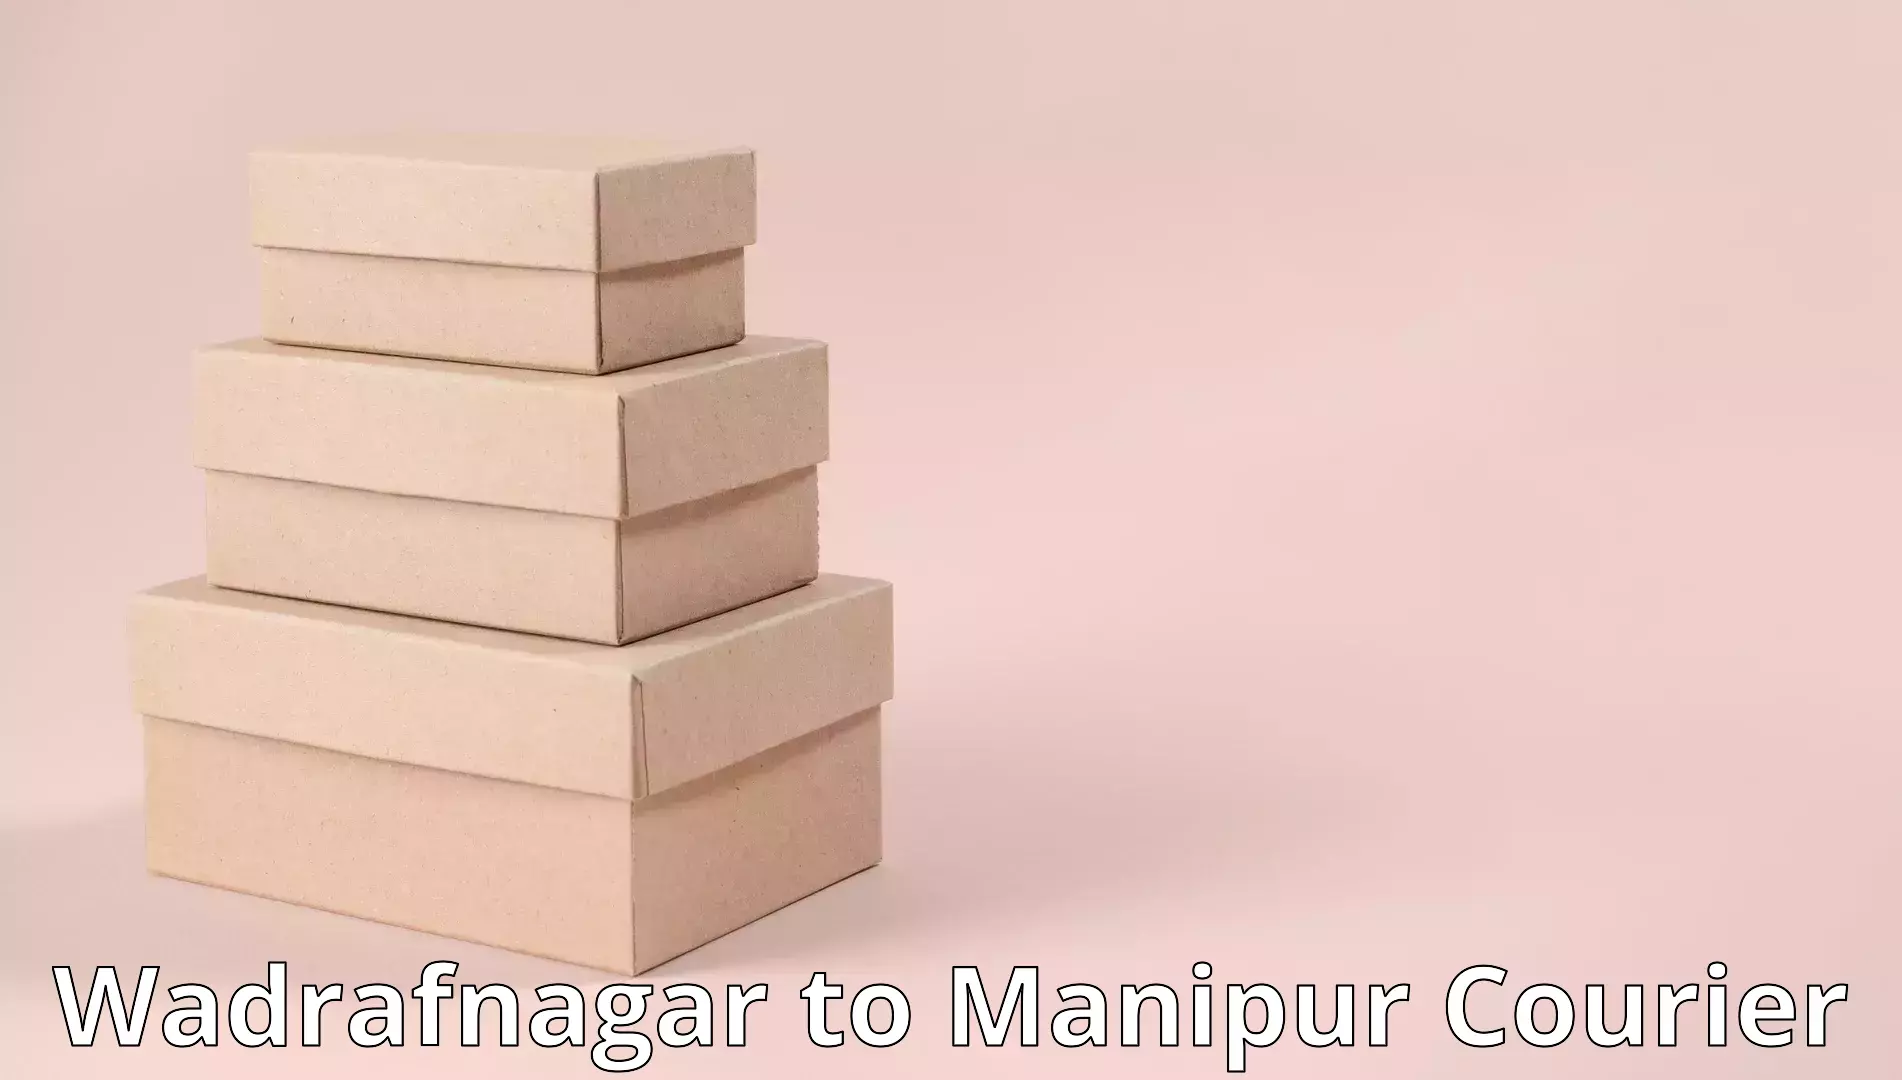 Moving and packing experts Wadrafnagar to Chandel